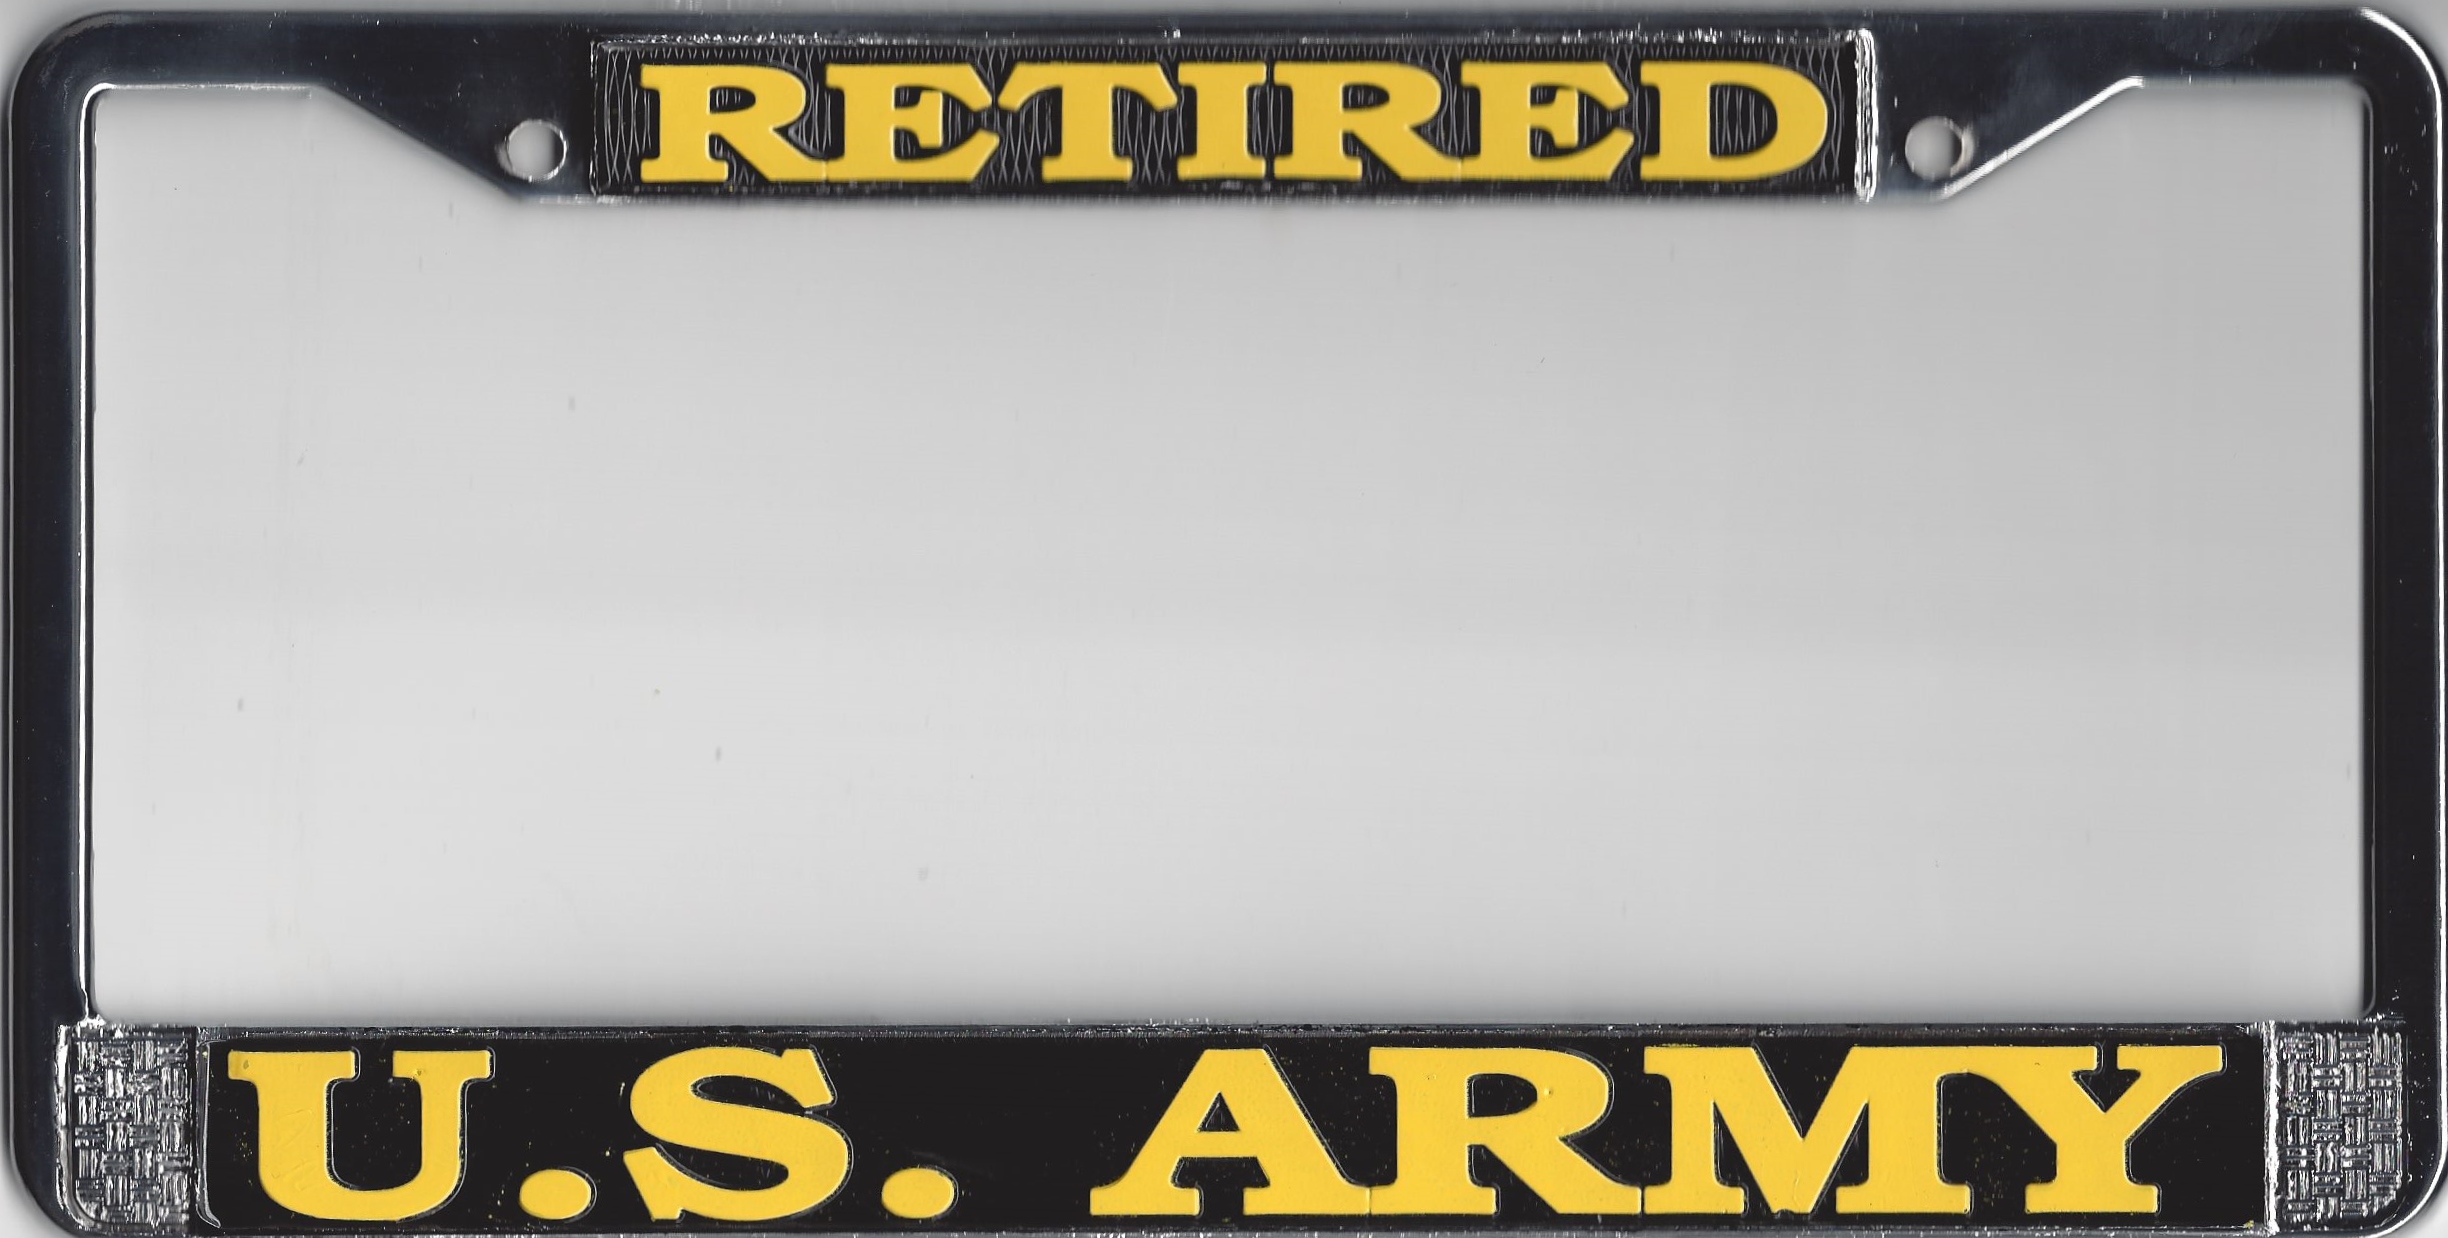 U.S. Army Retired Chrome License Plate Frame   Free SCREW Caps with this Frame